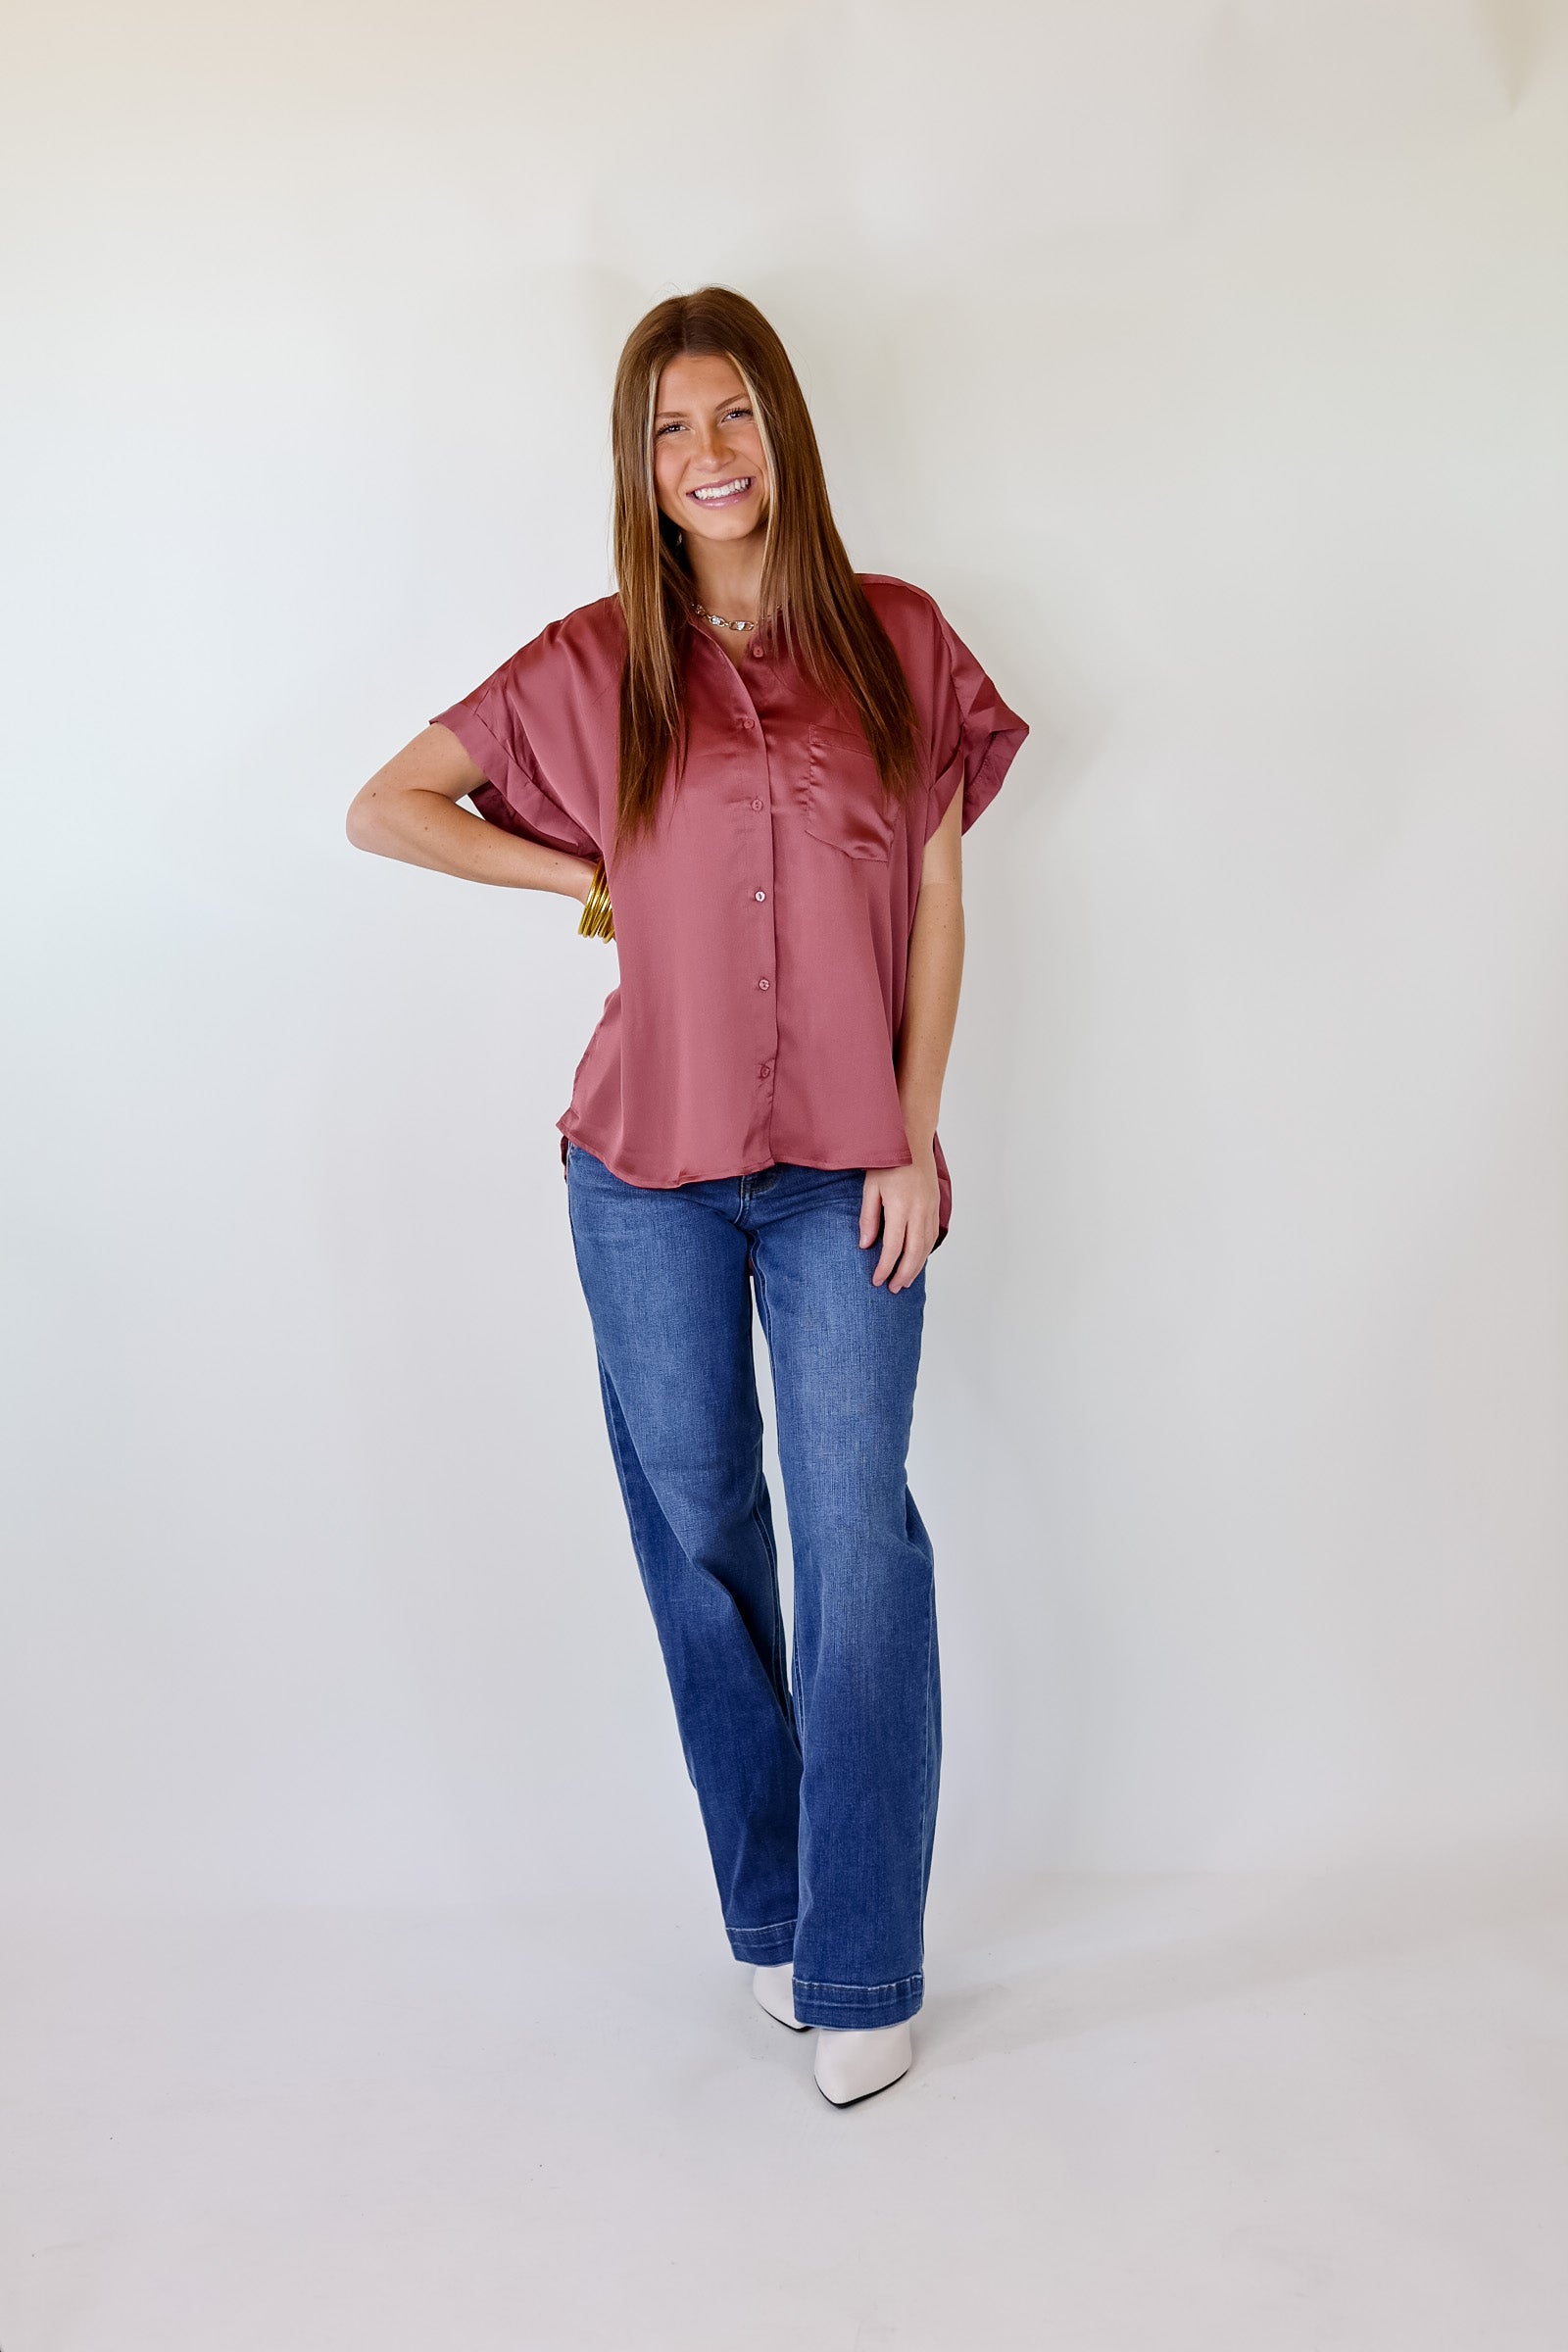 Free To Be Fab Button Up Short Sleeve Top in Mauve Pink - Giddy Up Glamour Boutique